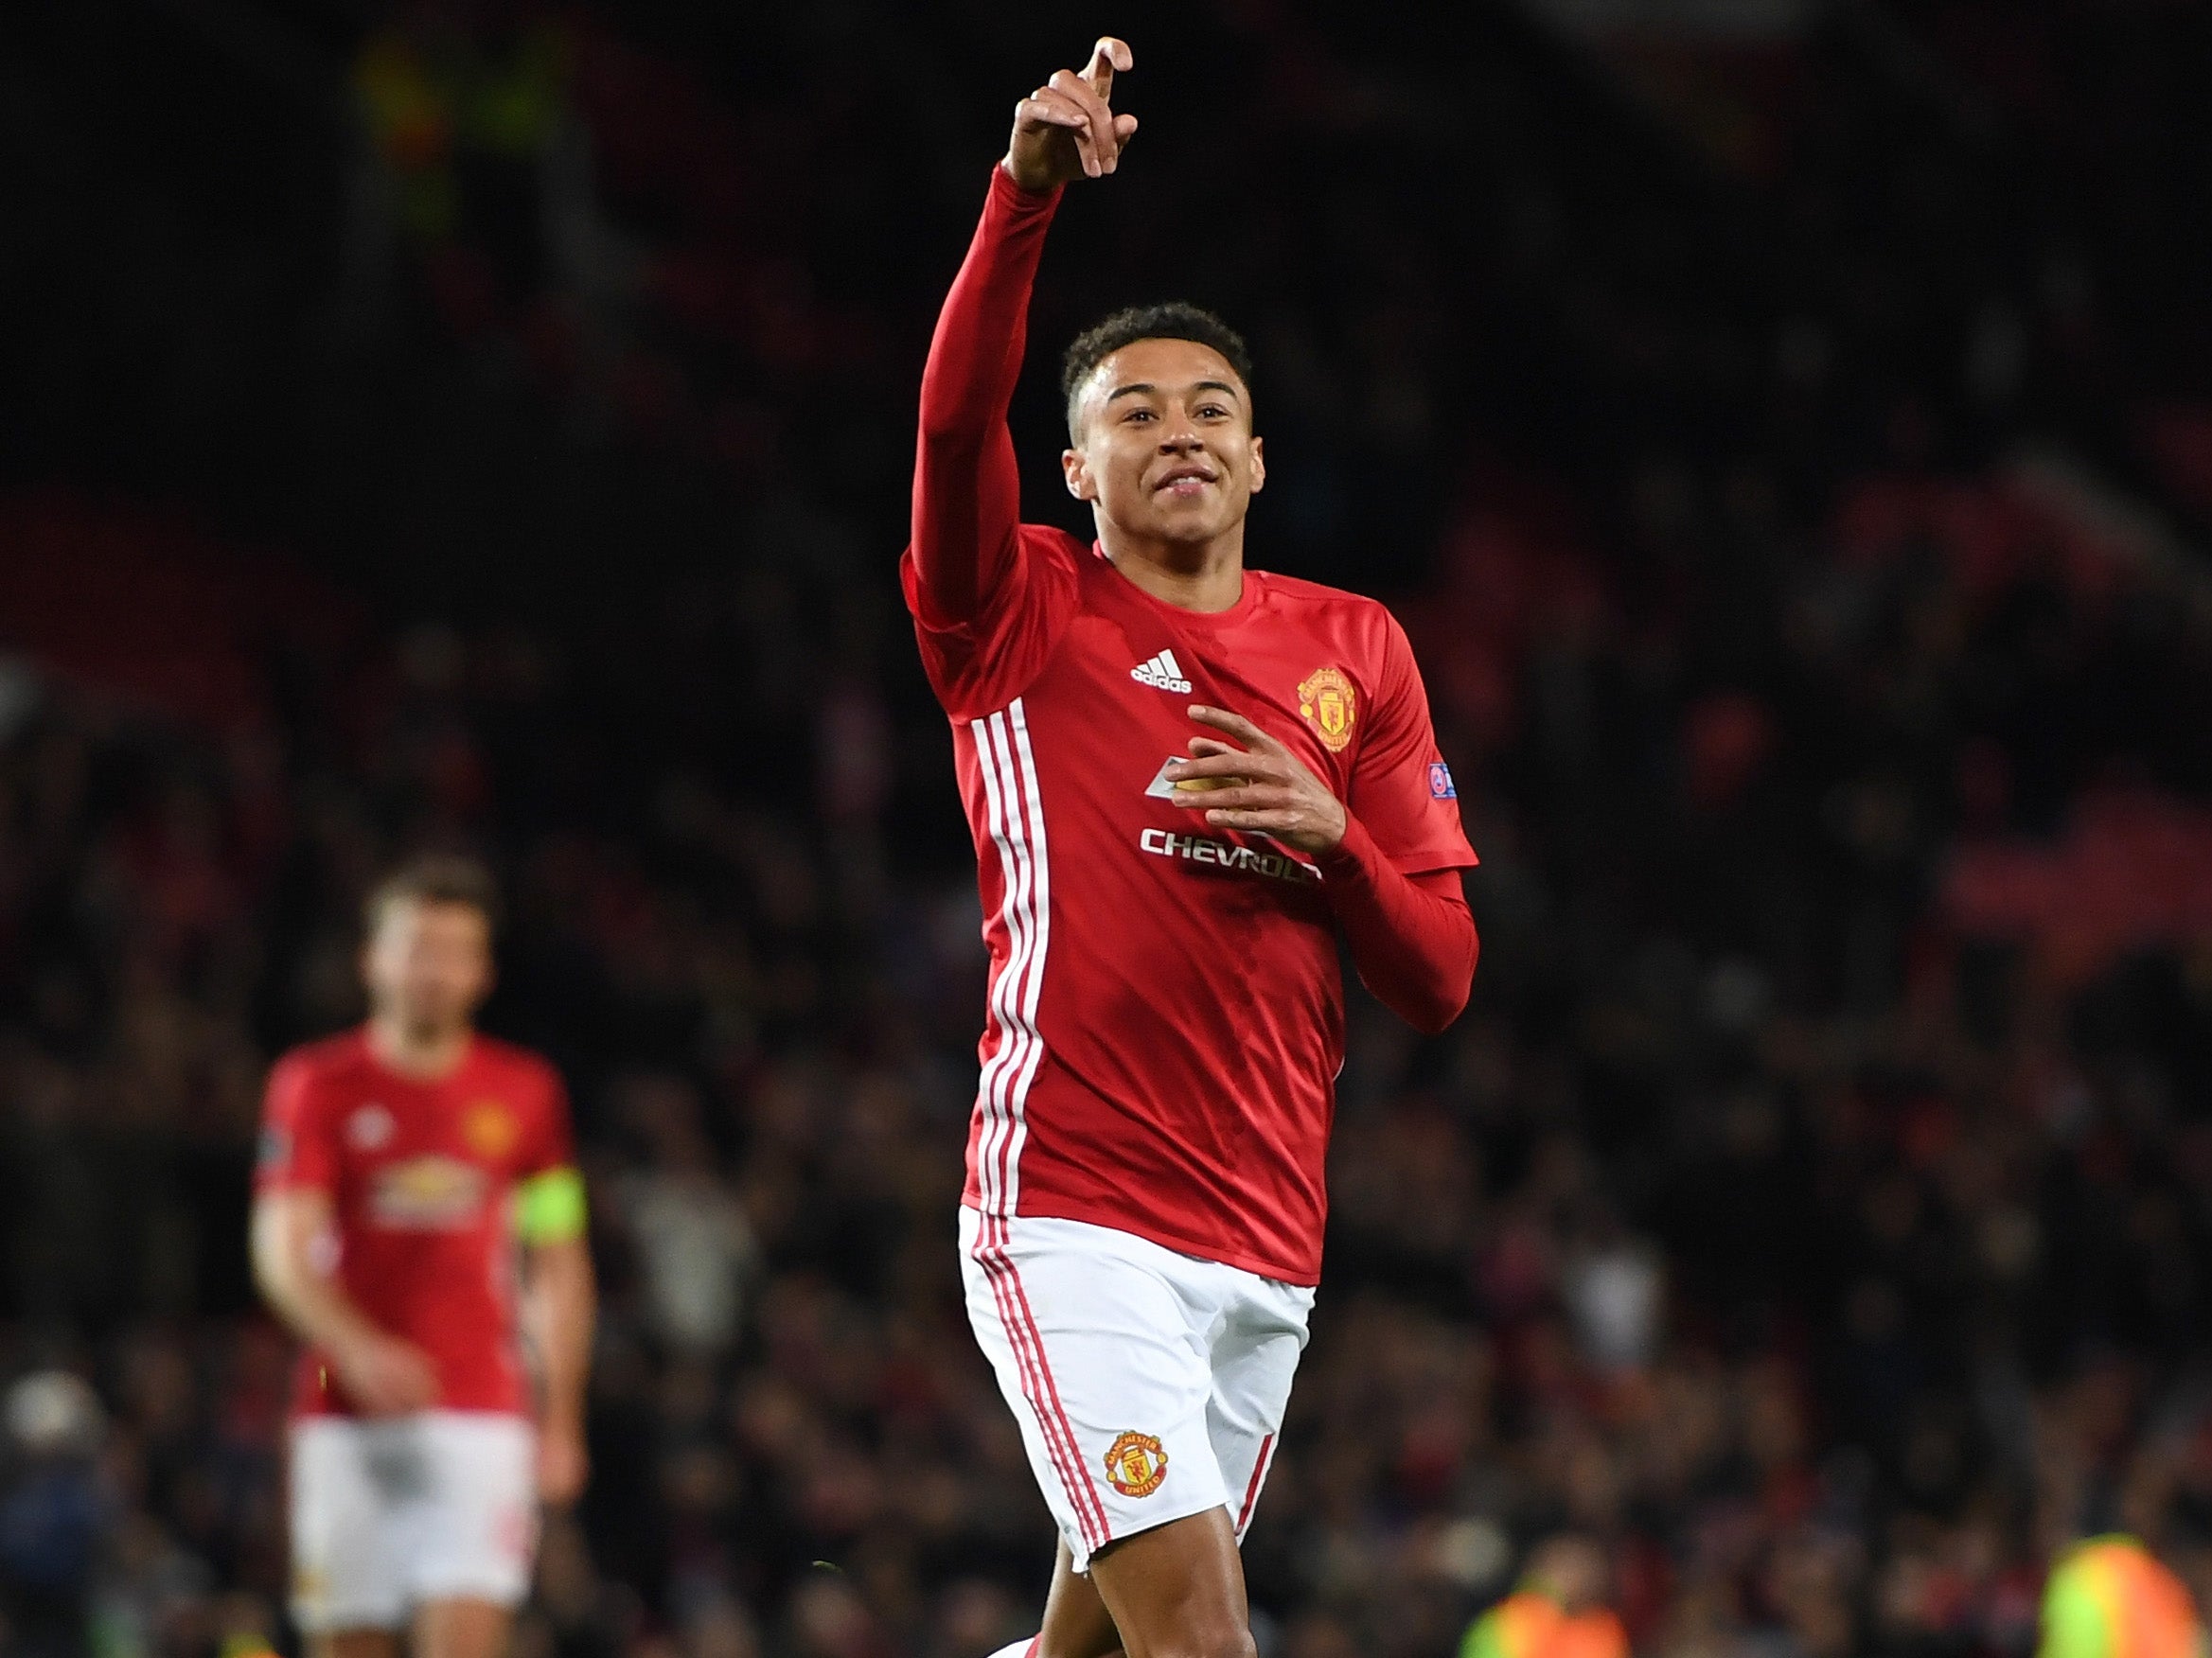 Lingard has been offered a deal which would see his wages double